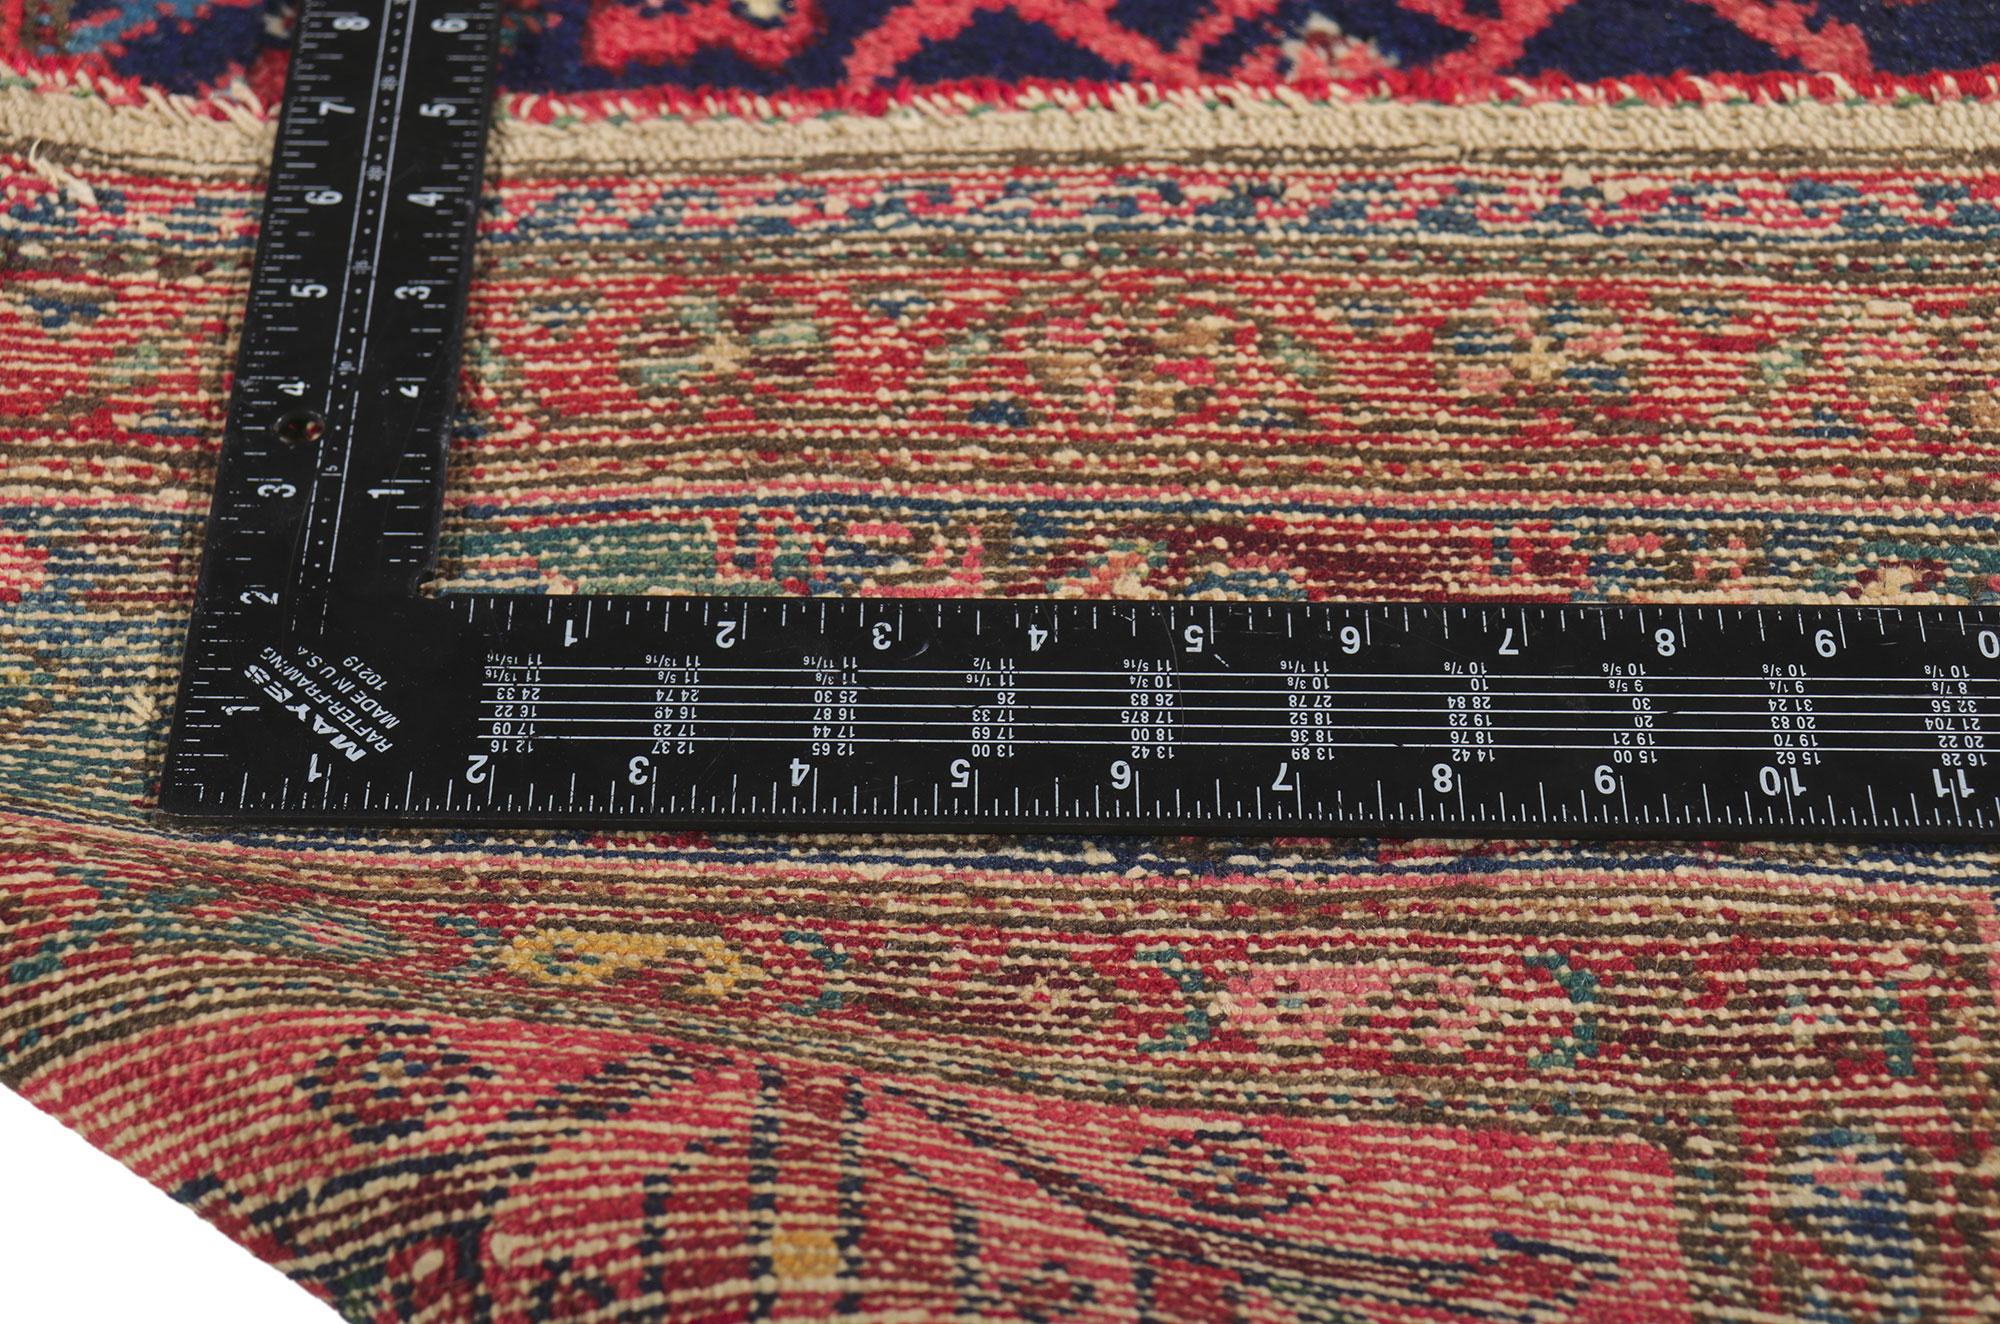 Antique Persian Malayer Rug In Good Condition For Sale In Dallas, TX